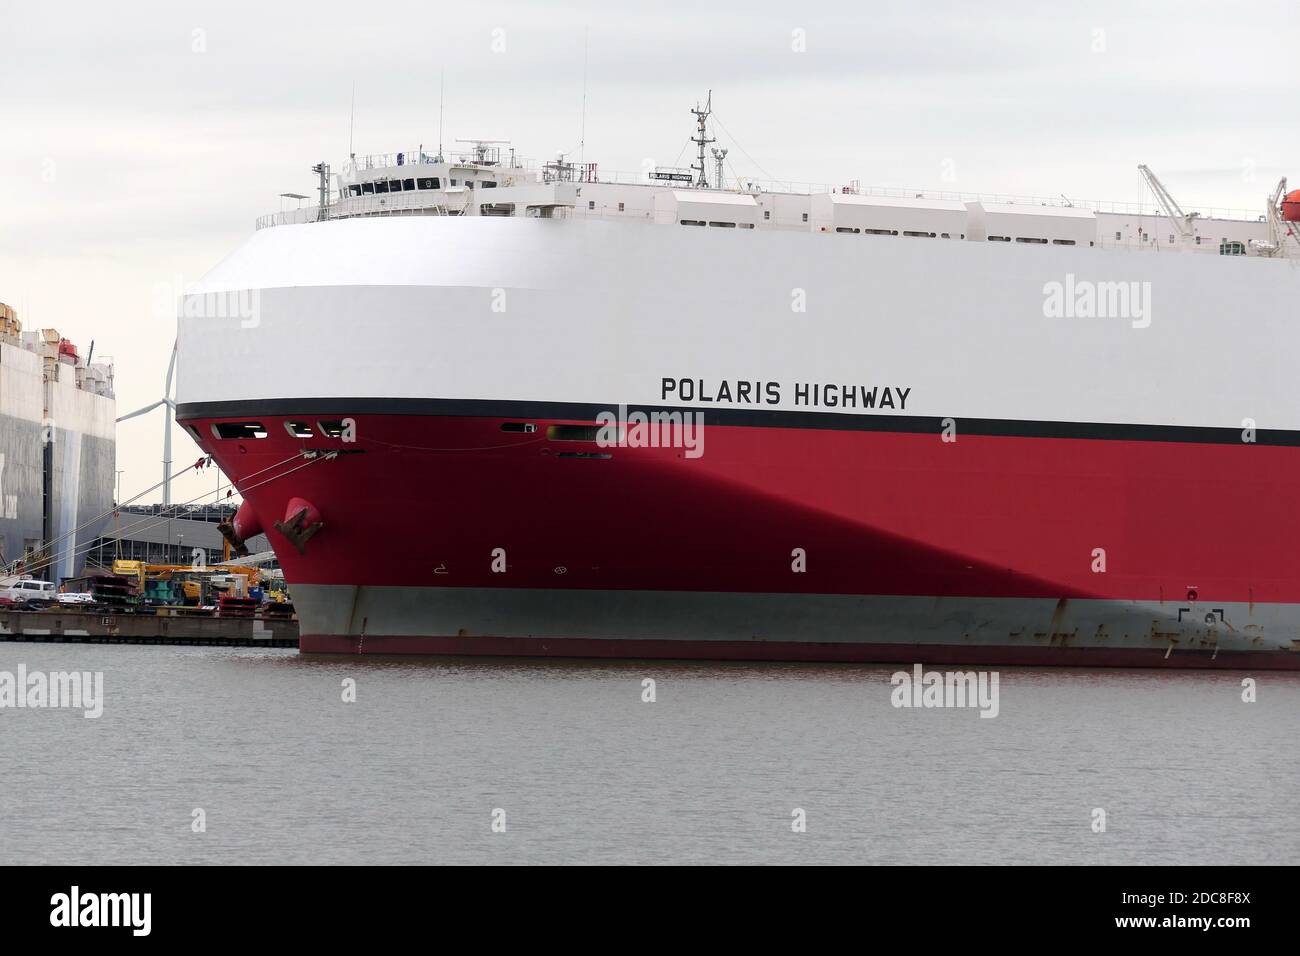 The car carrier Polaris Highway will be in the port of Bremerhaven on August 20, 2020. Stock Photo